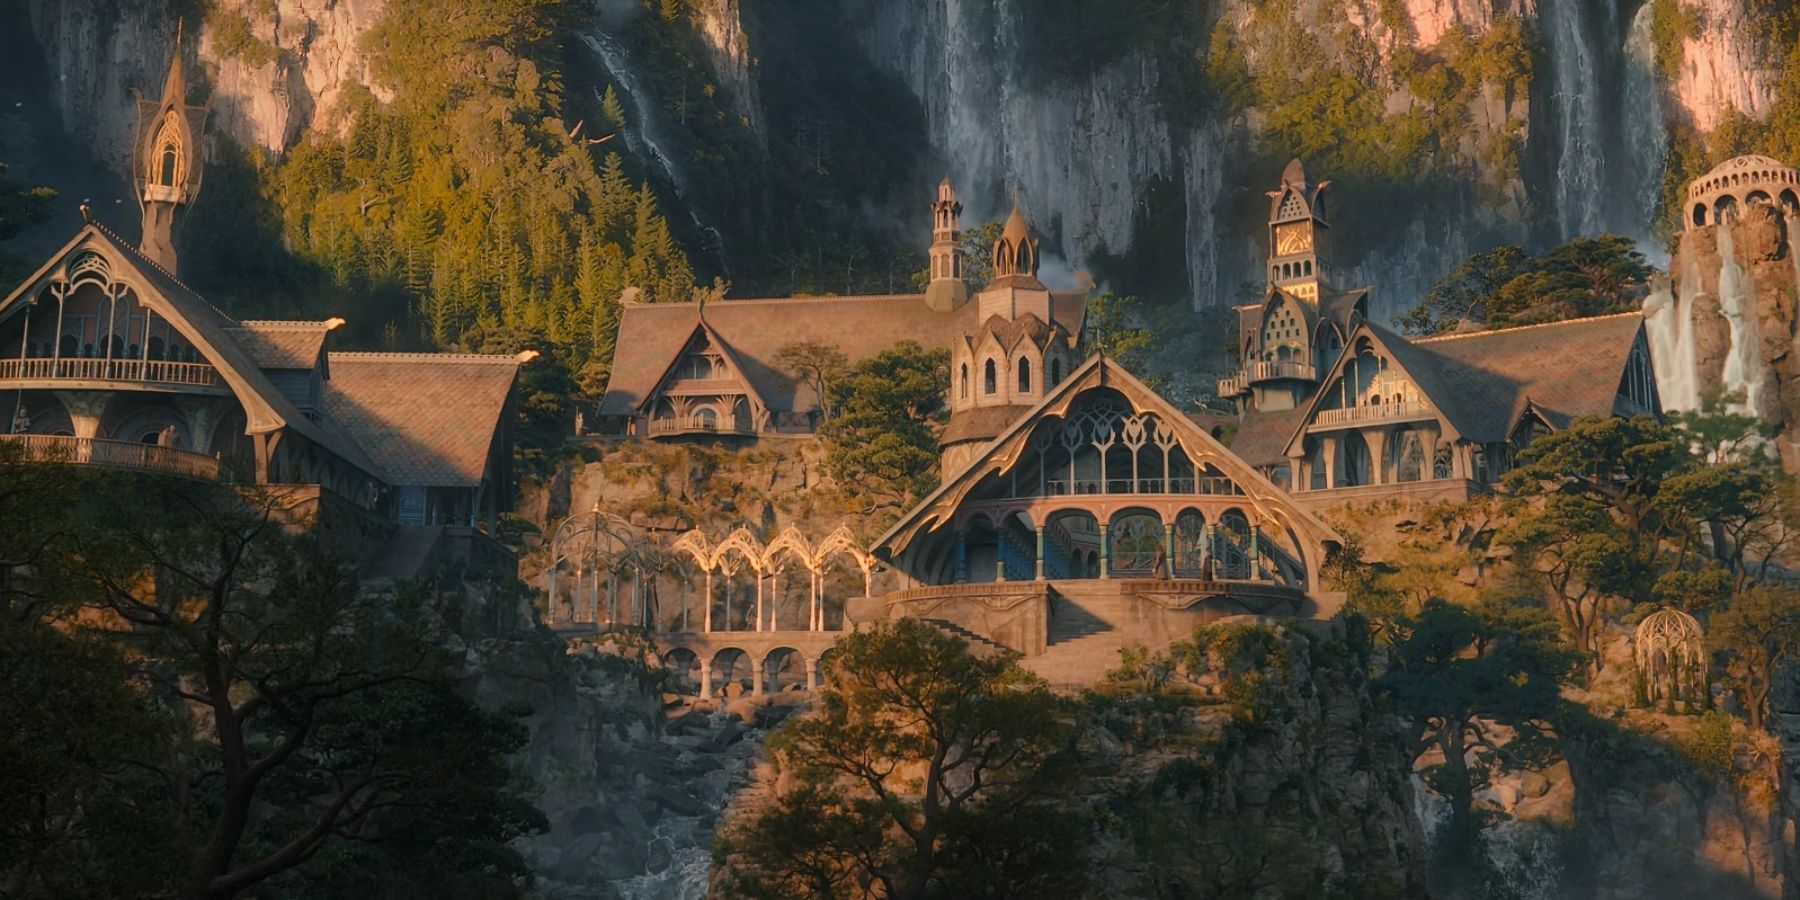 Lord of the Rings_Rivendell